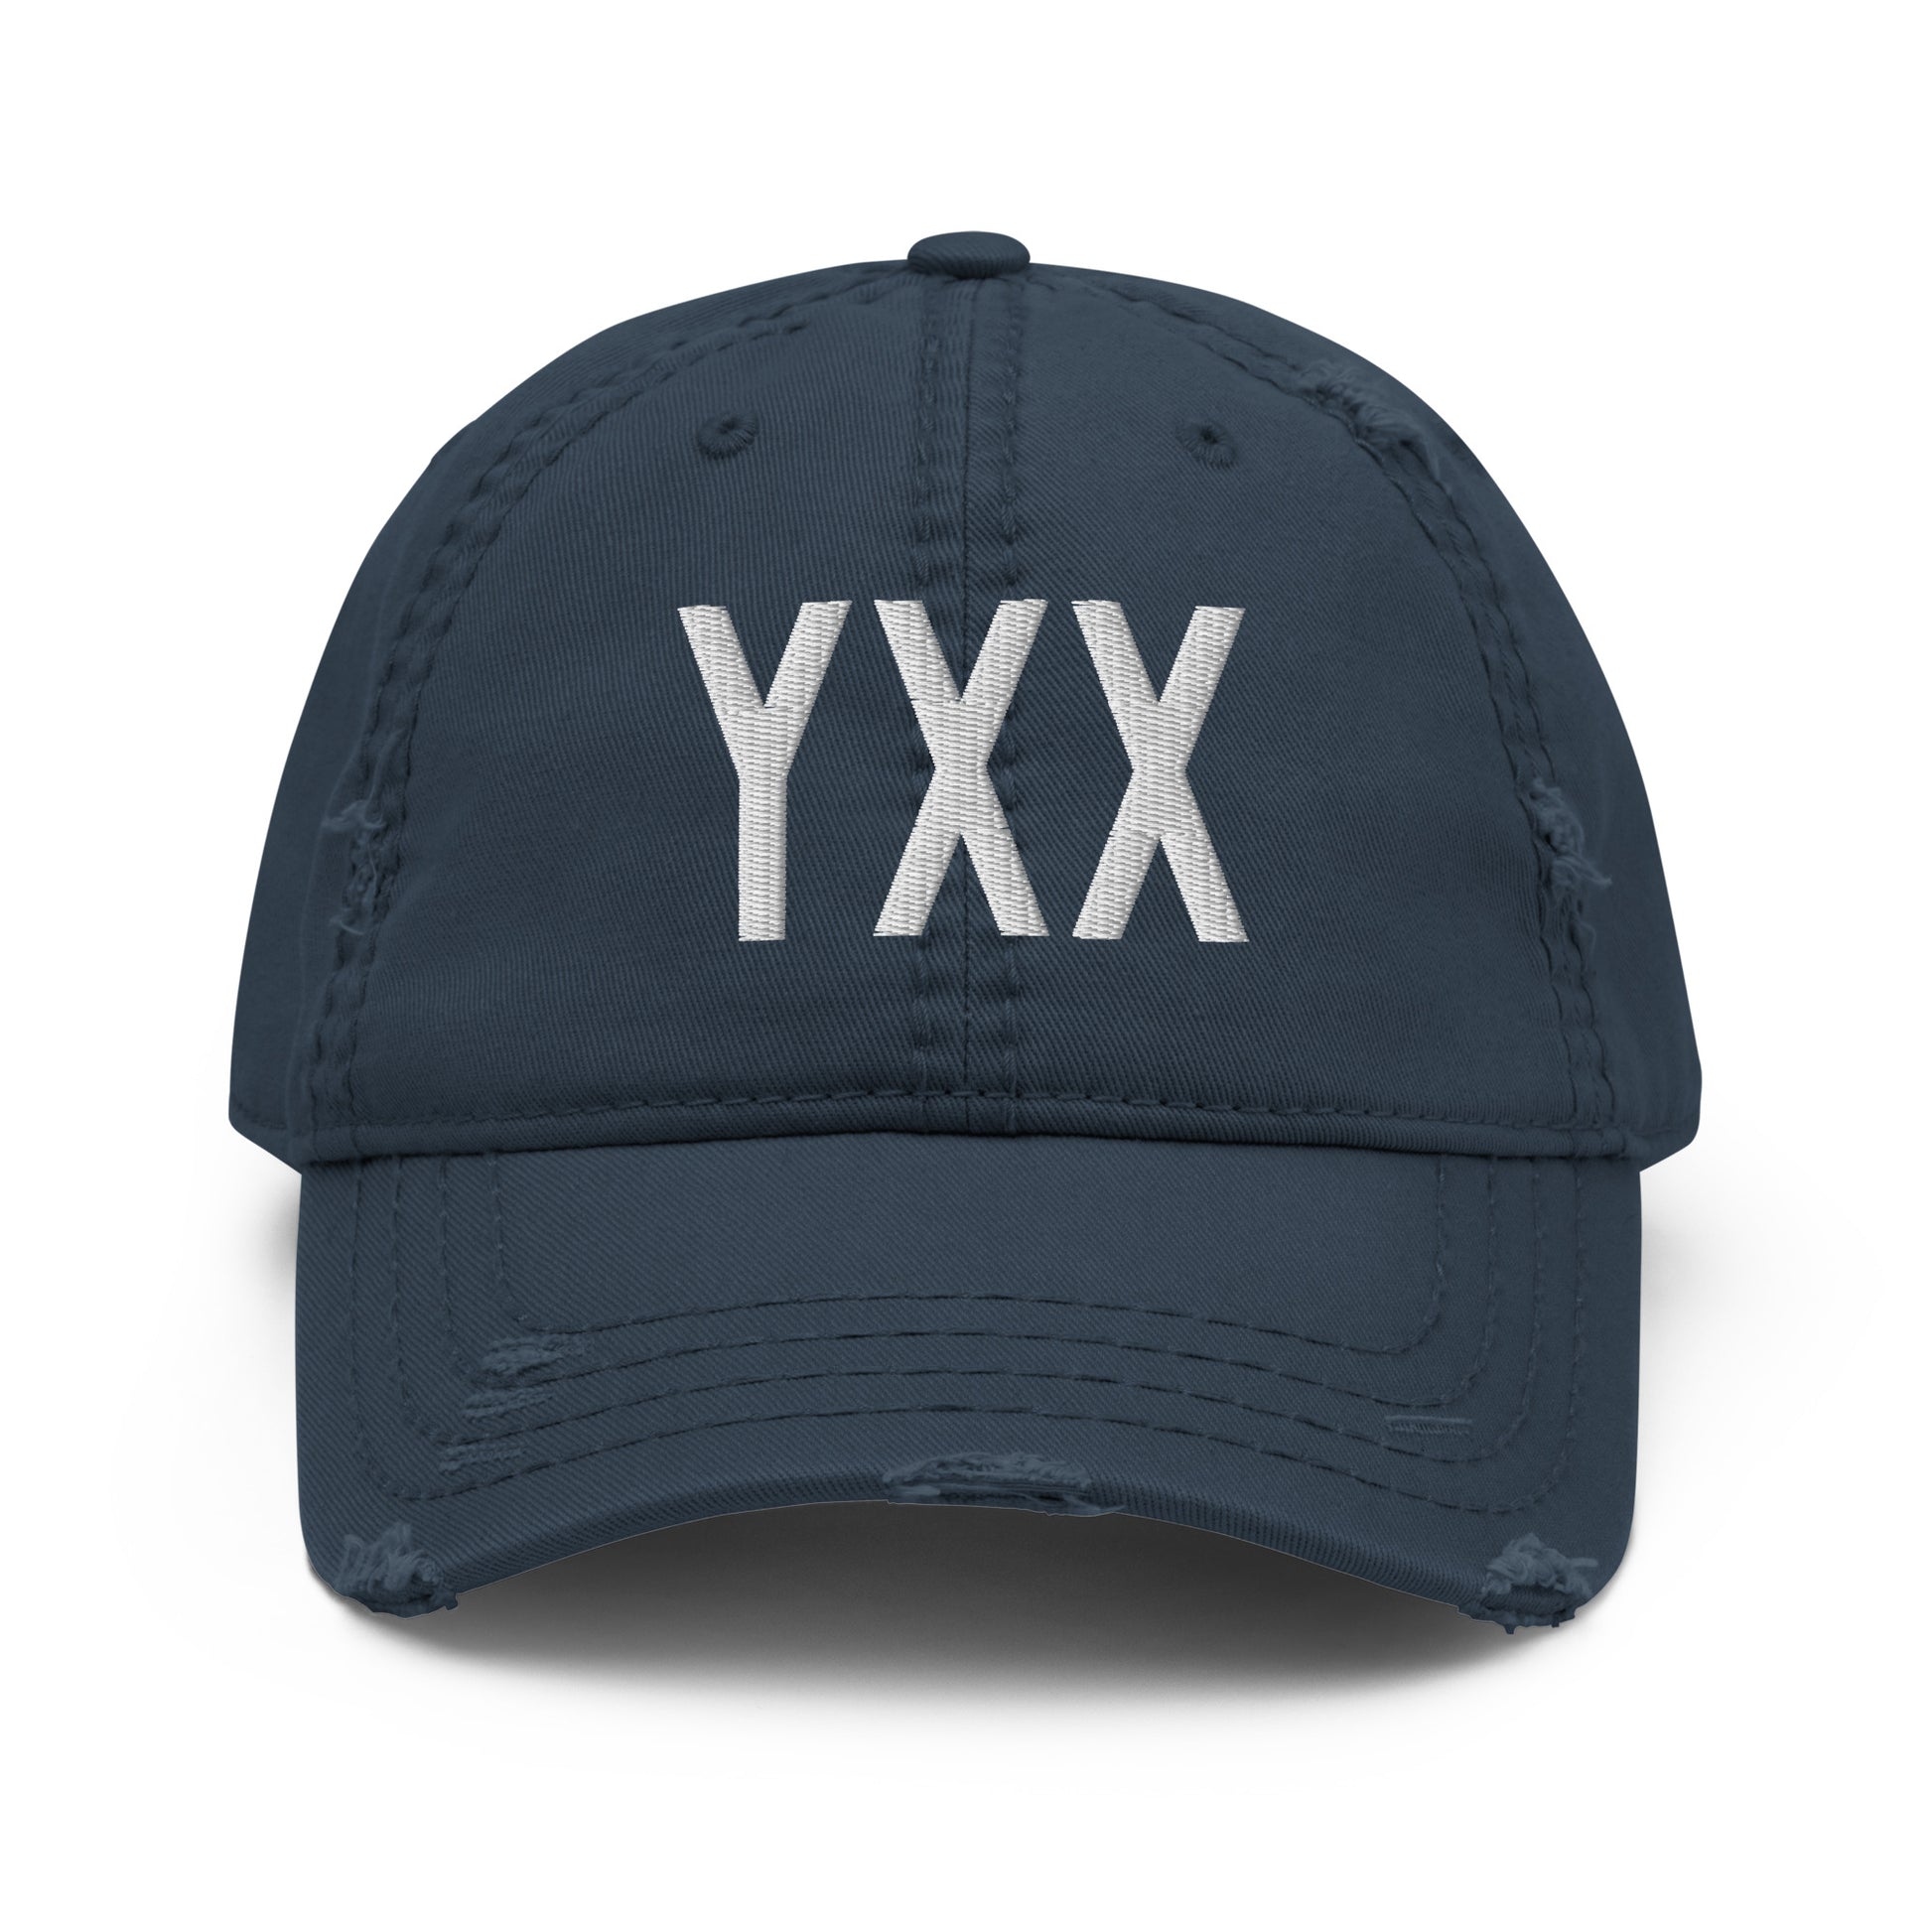 Airport Code Distressed Hat - White • YXX Abbotsford • YHM Designs - Image 13